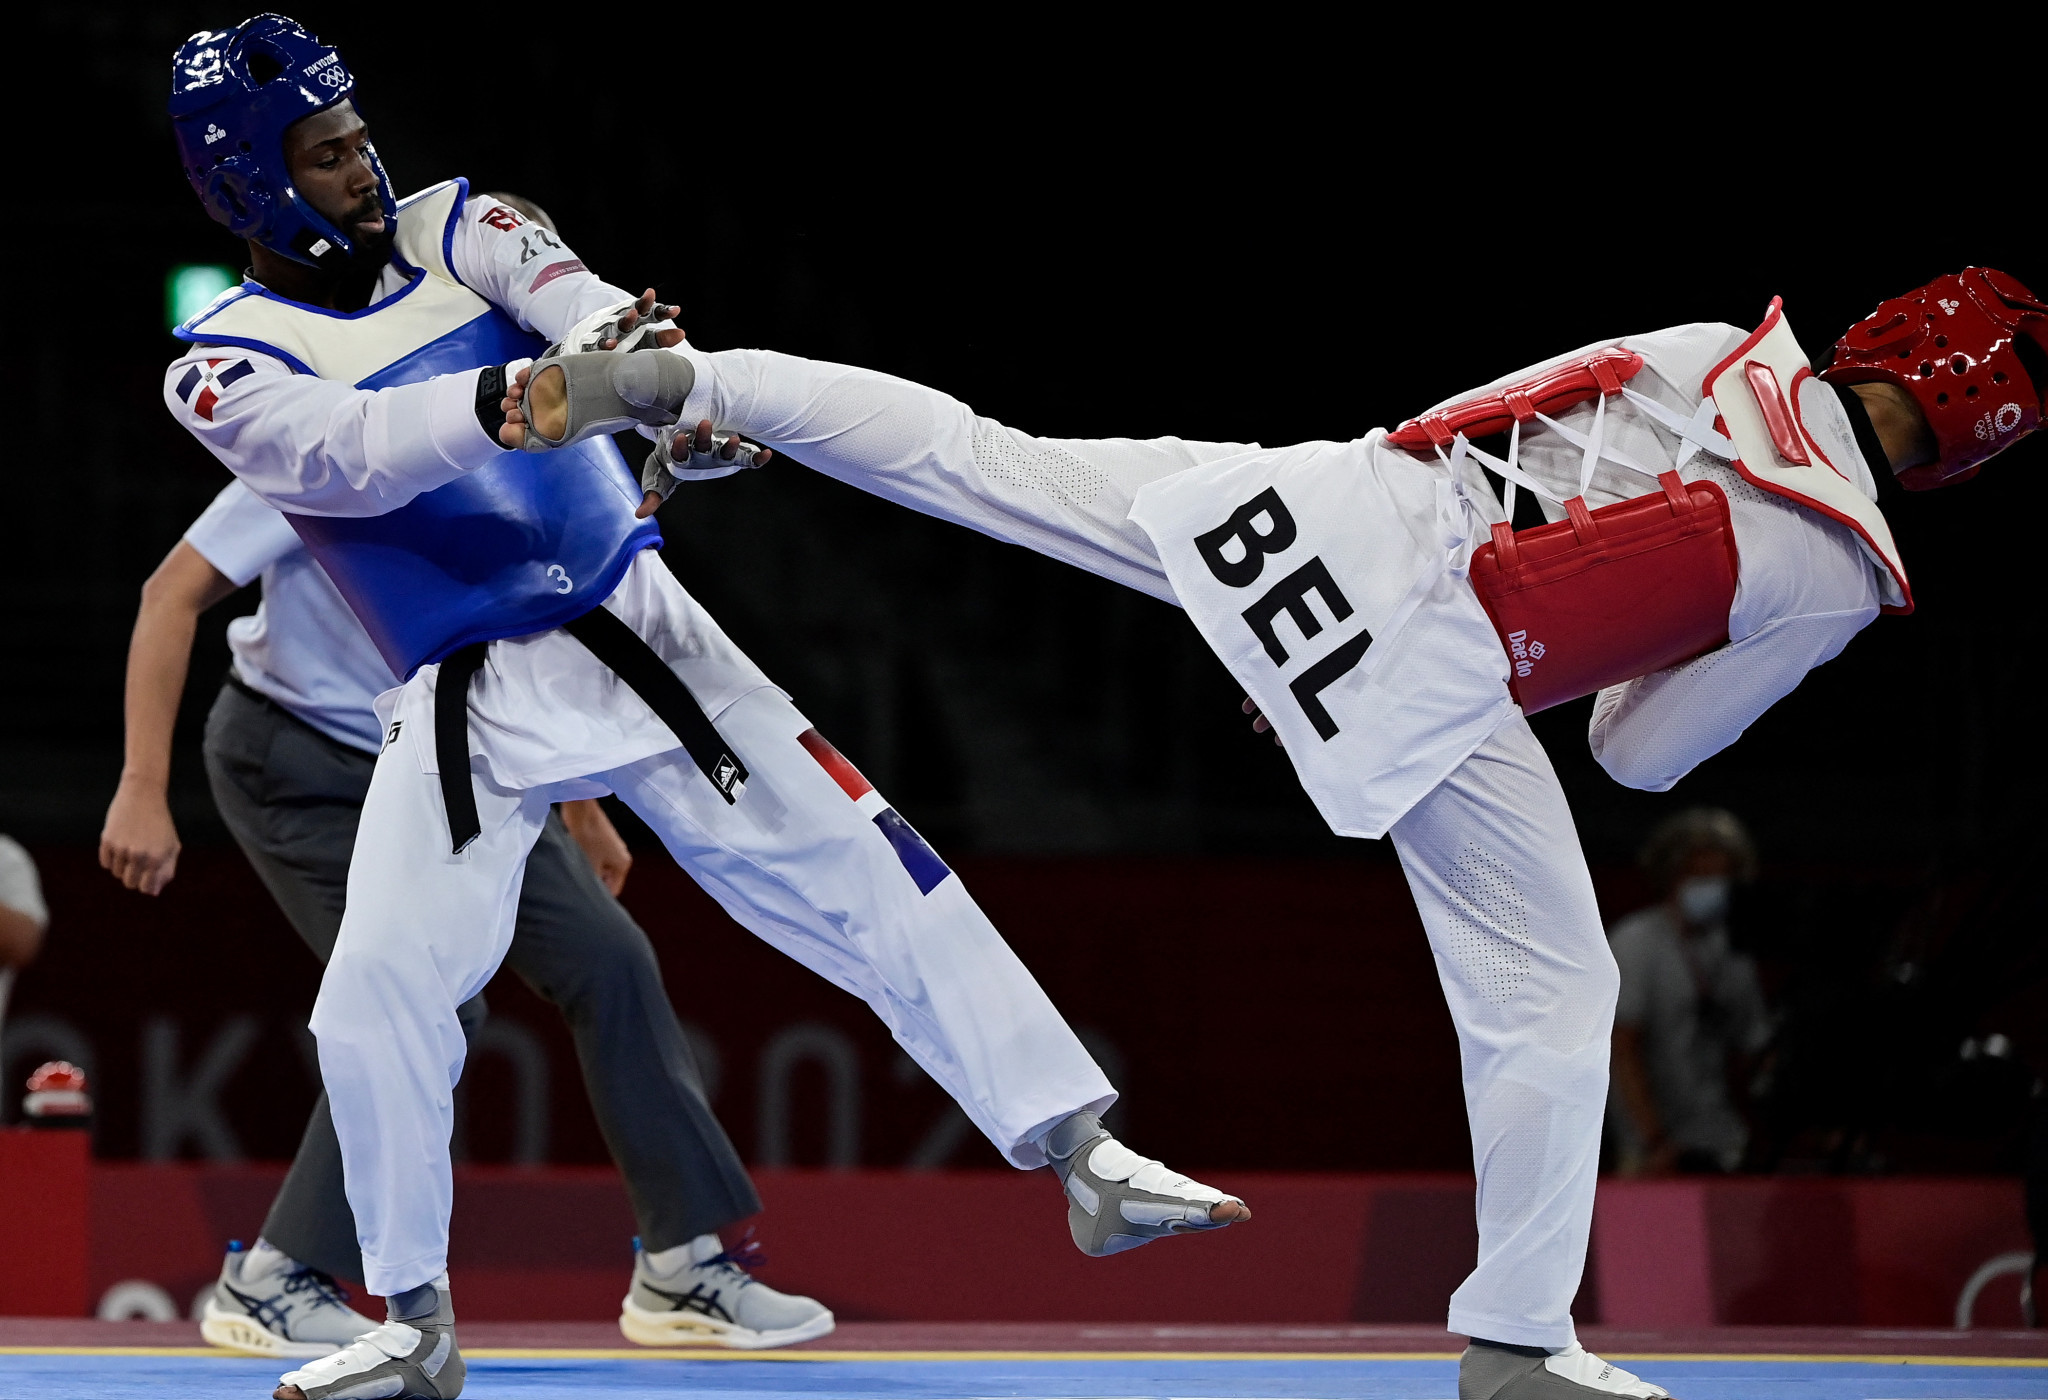 The MoU sets out to teach refugees and displaced people taekwondo and the values of Olympism ©Getty Images